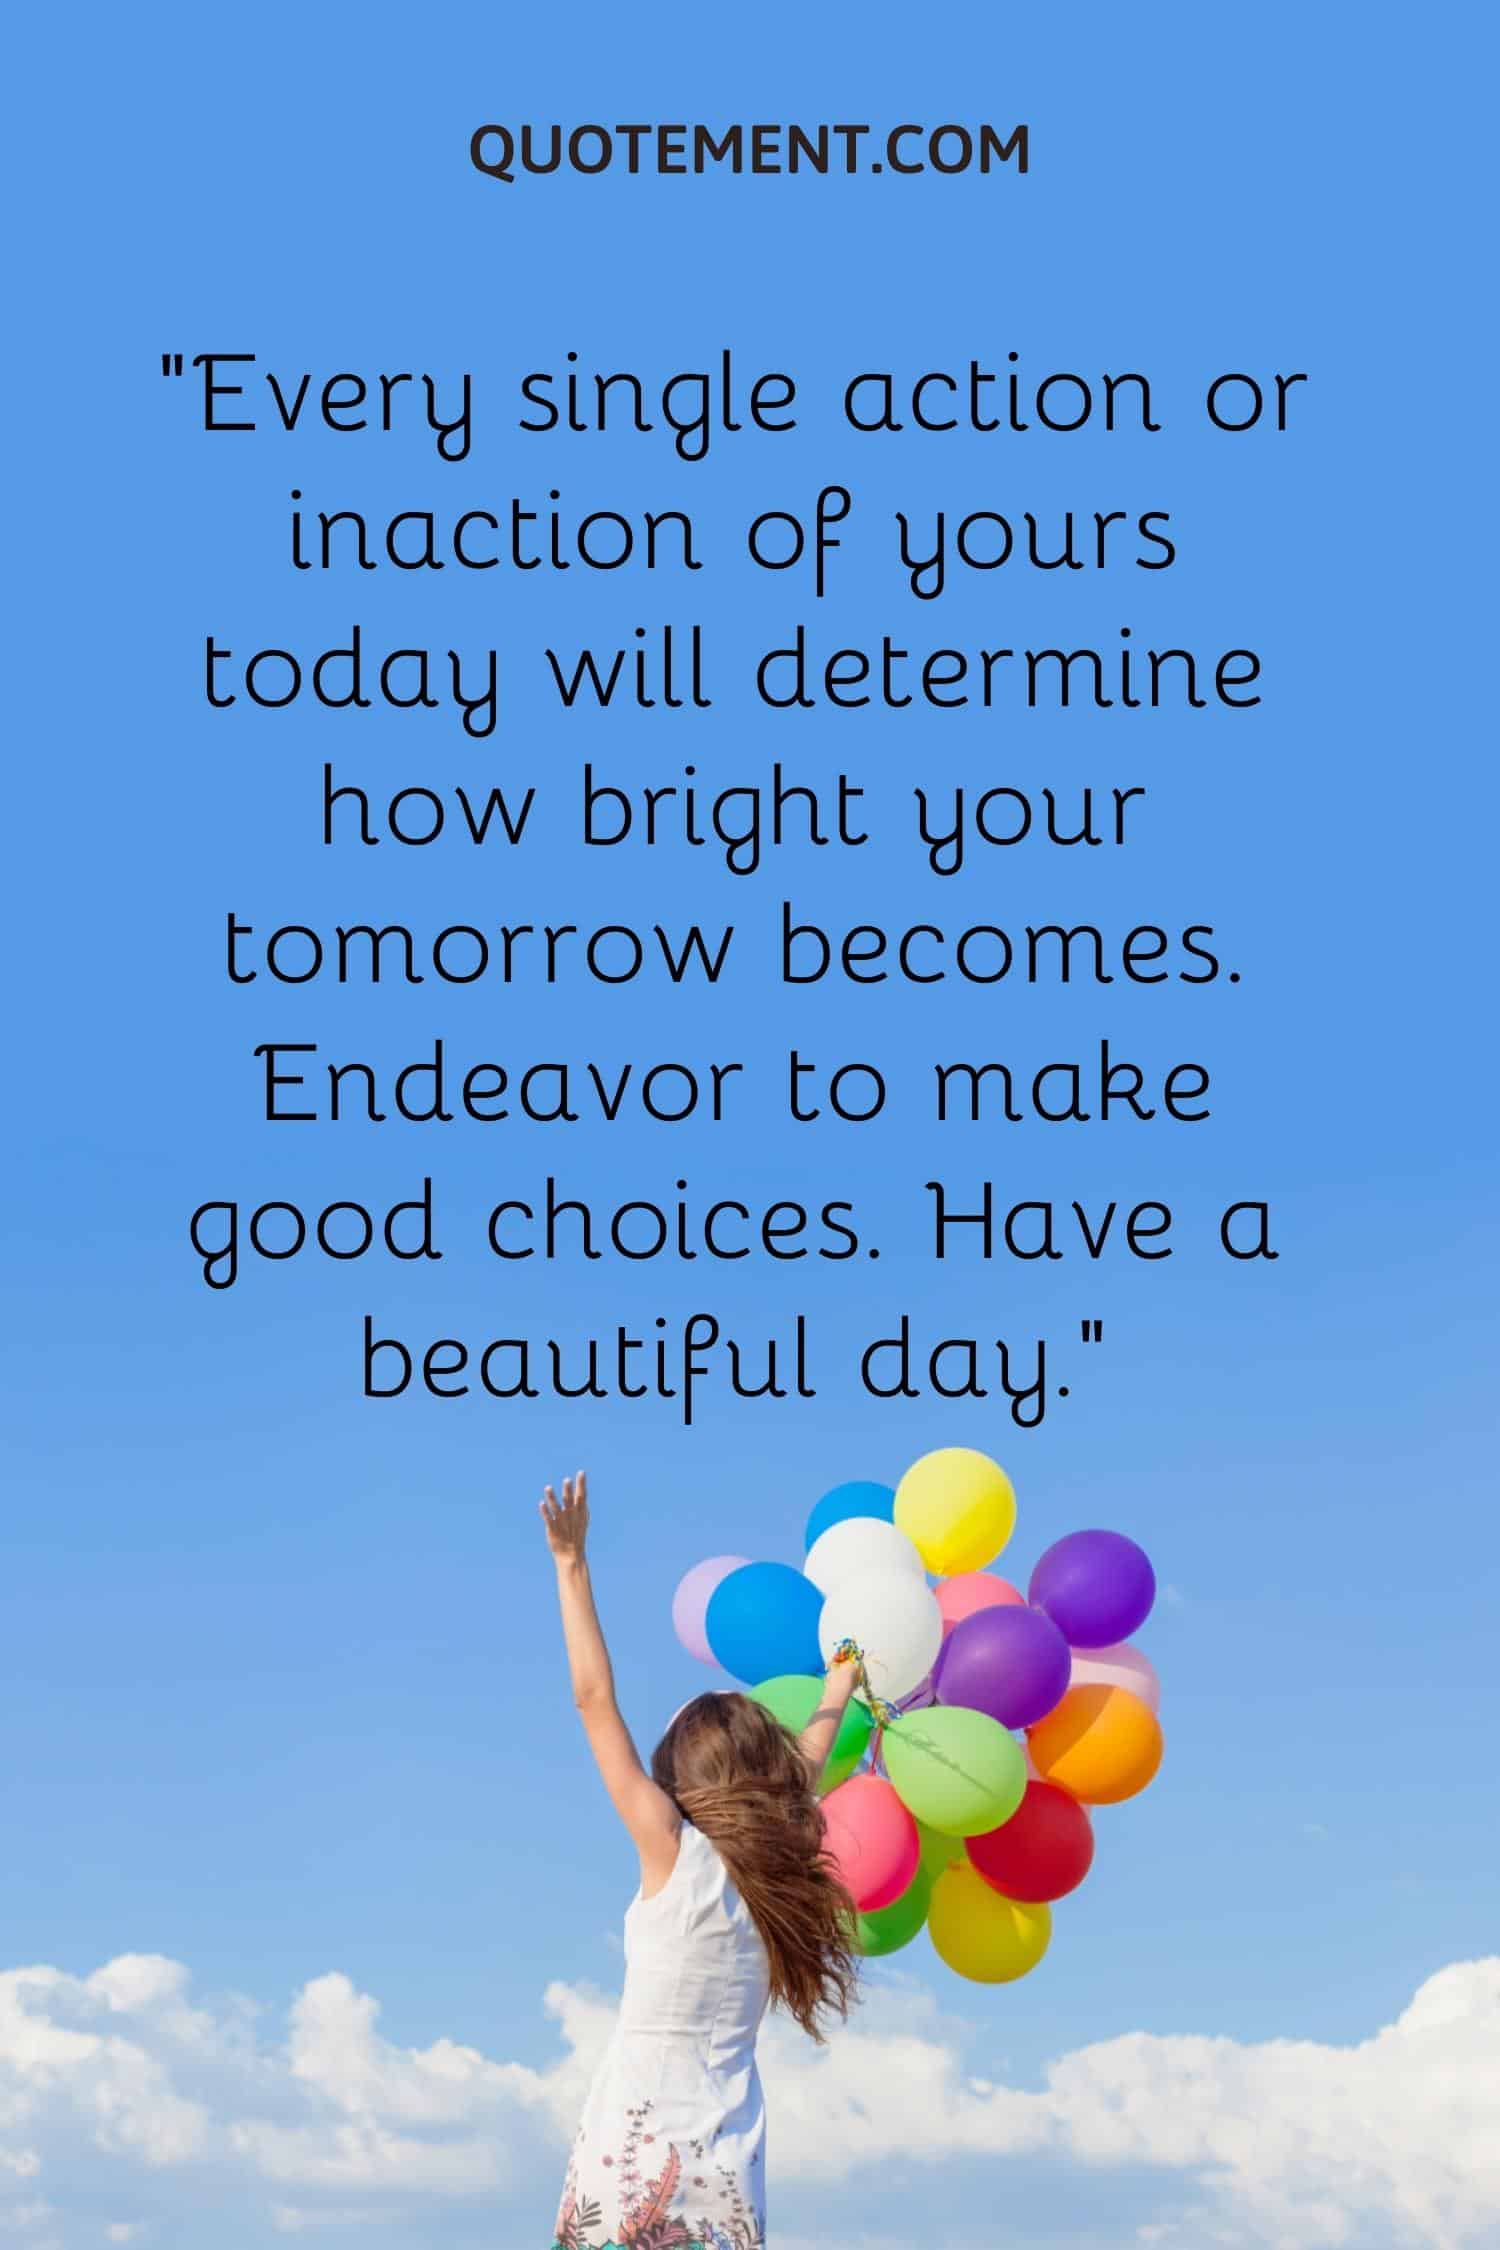 Every single action or inaction of yours today will determine how bright your tomorrow becomes